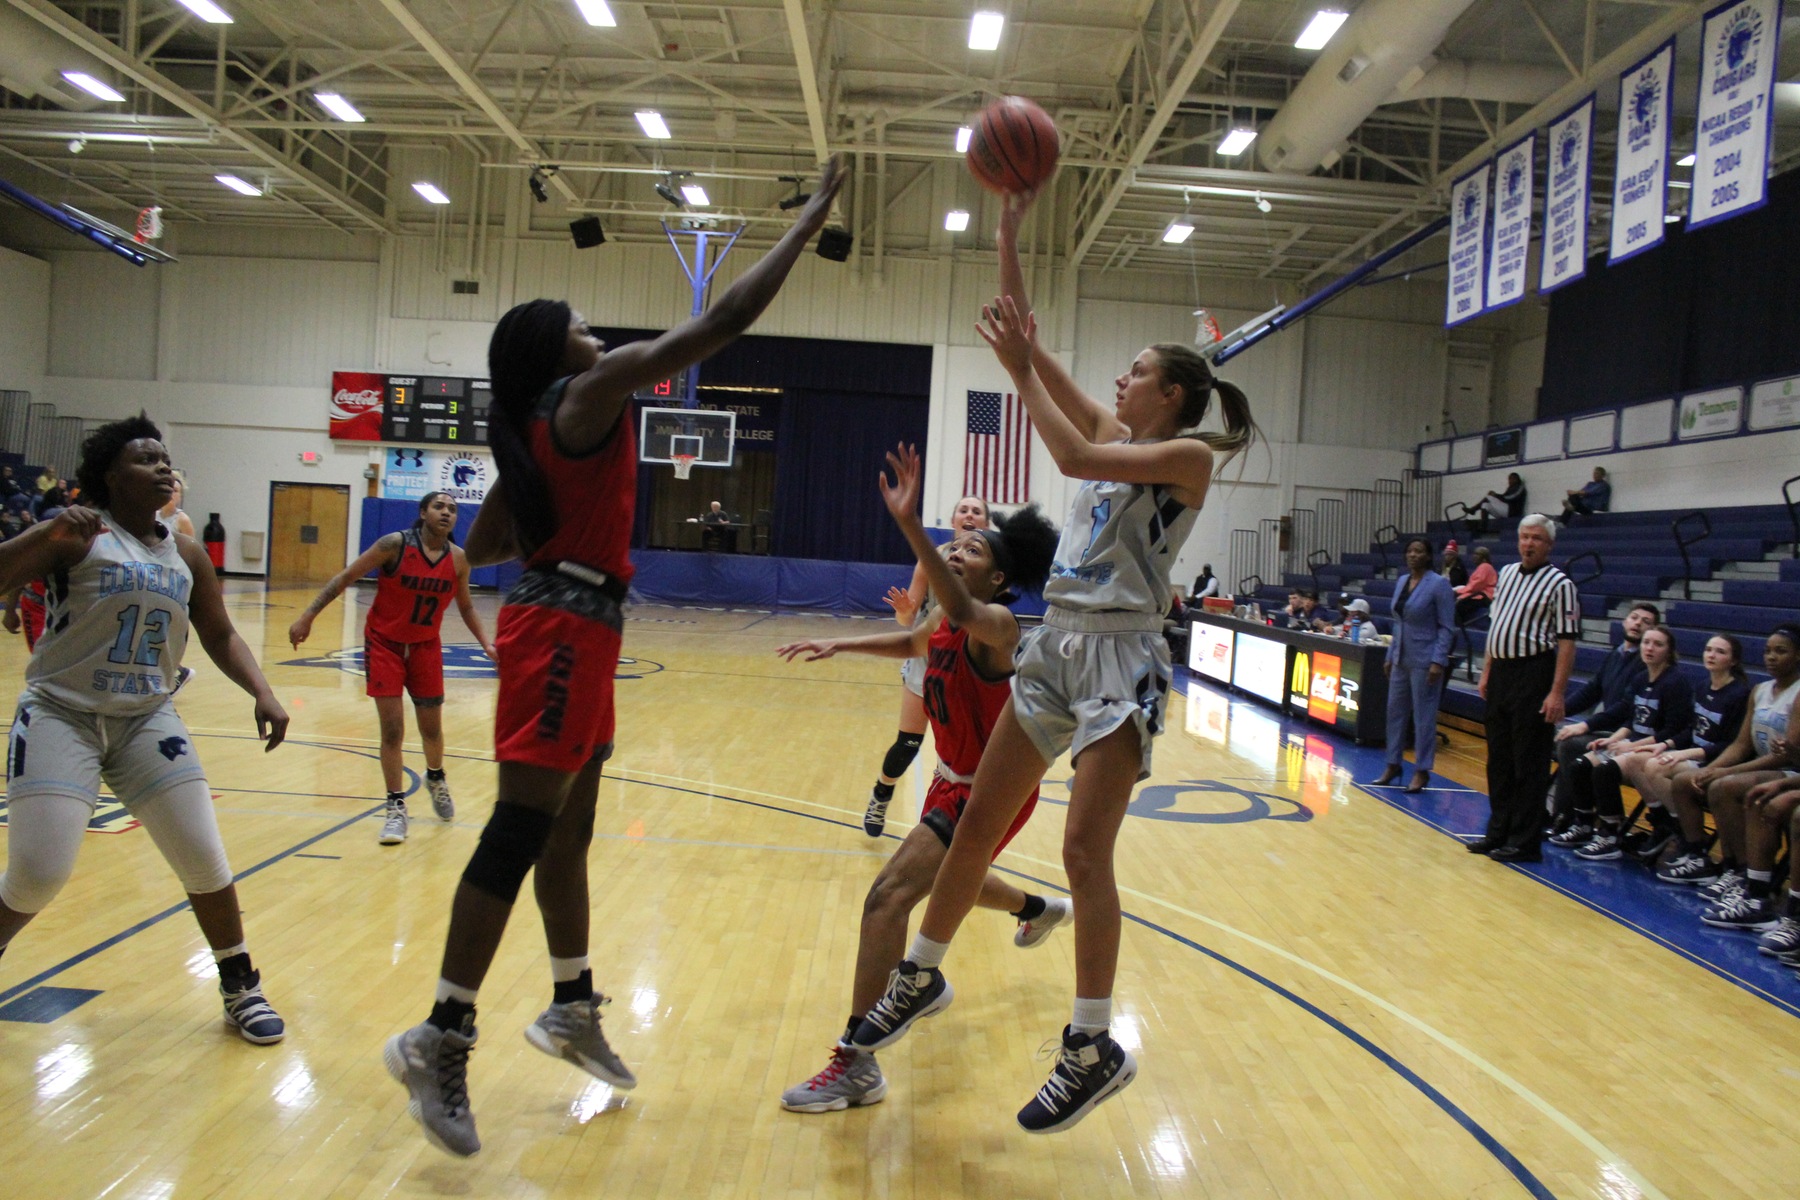 PREVIEW: Lady Cougars Open Postseason Play vs. #2 Motlow State